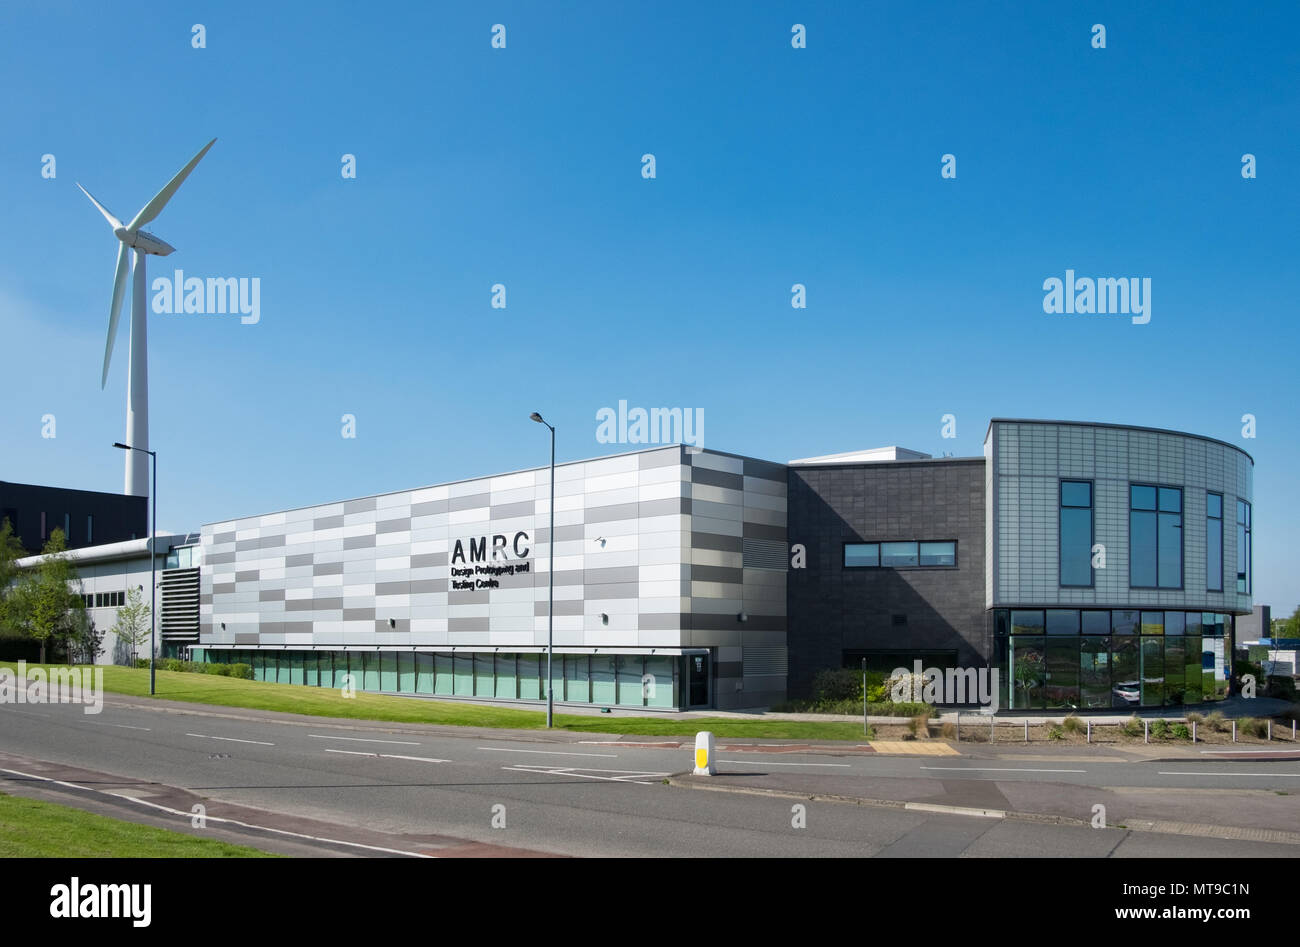 4th May 2018, Sheffield, United Kingdom. Advanced Manufacturing Park at Sheffield, UK, is a high tech research and manufacturing industrial park Stock Photo